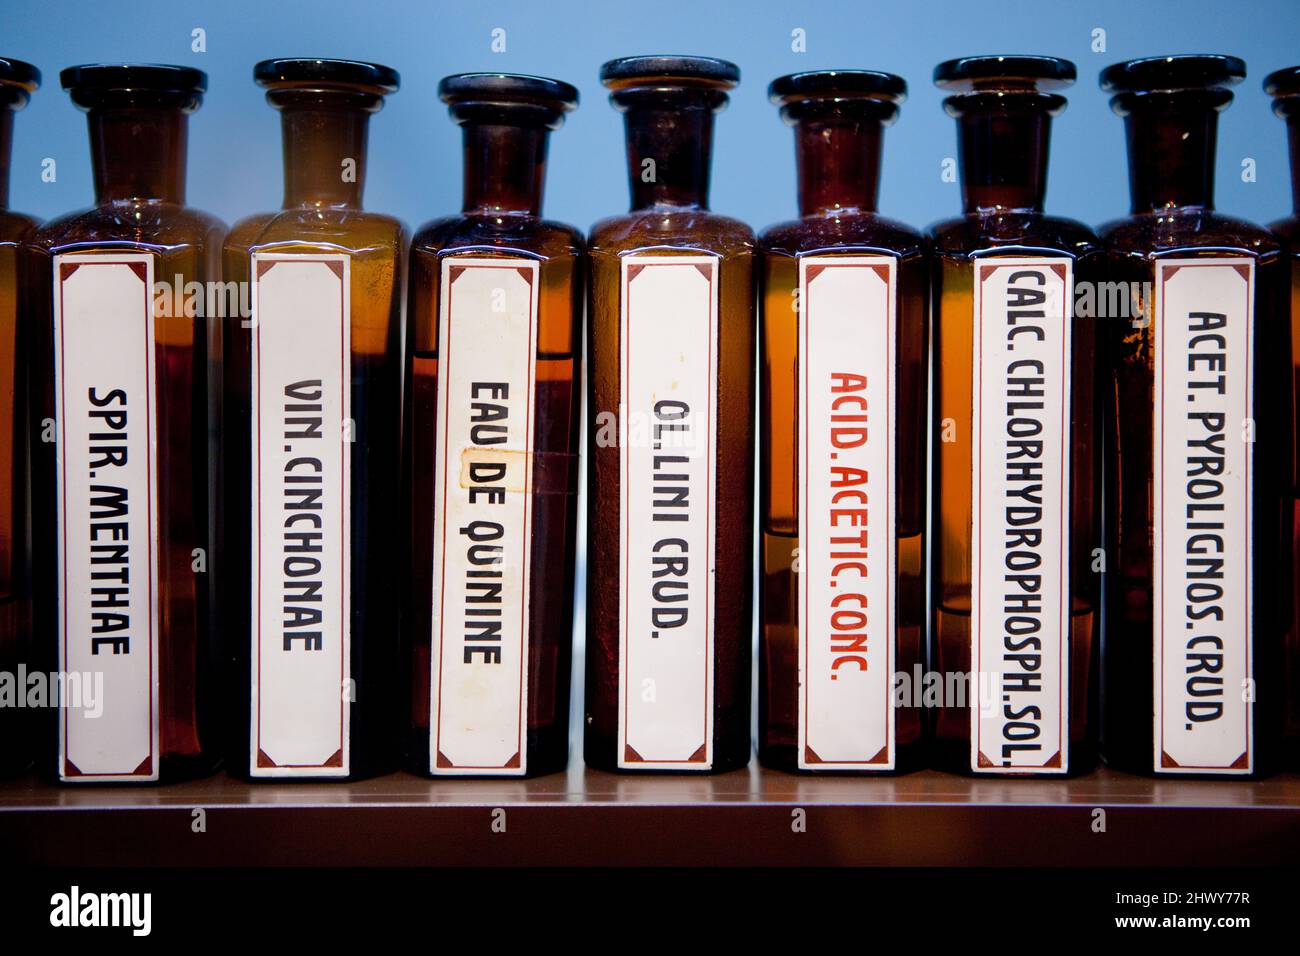 Absinthe related bottles in a display case in the Maison de l'Absinthe in Môtiers, Switzerland. Stock Photo